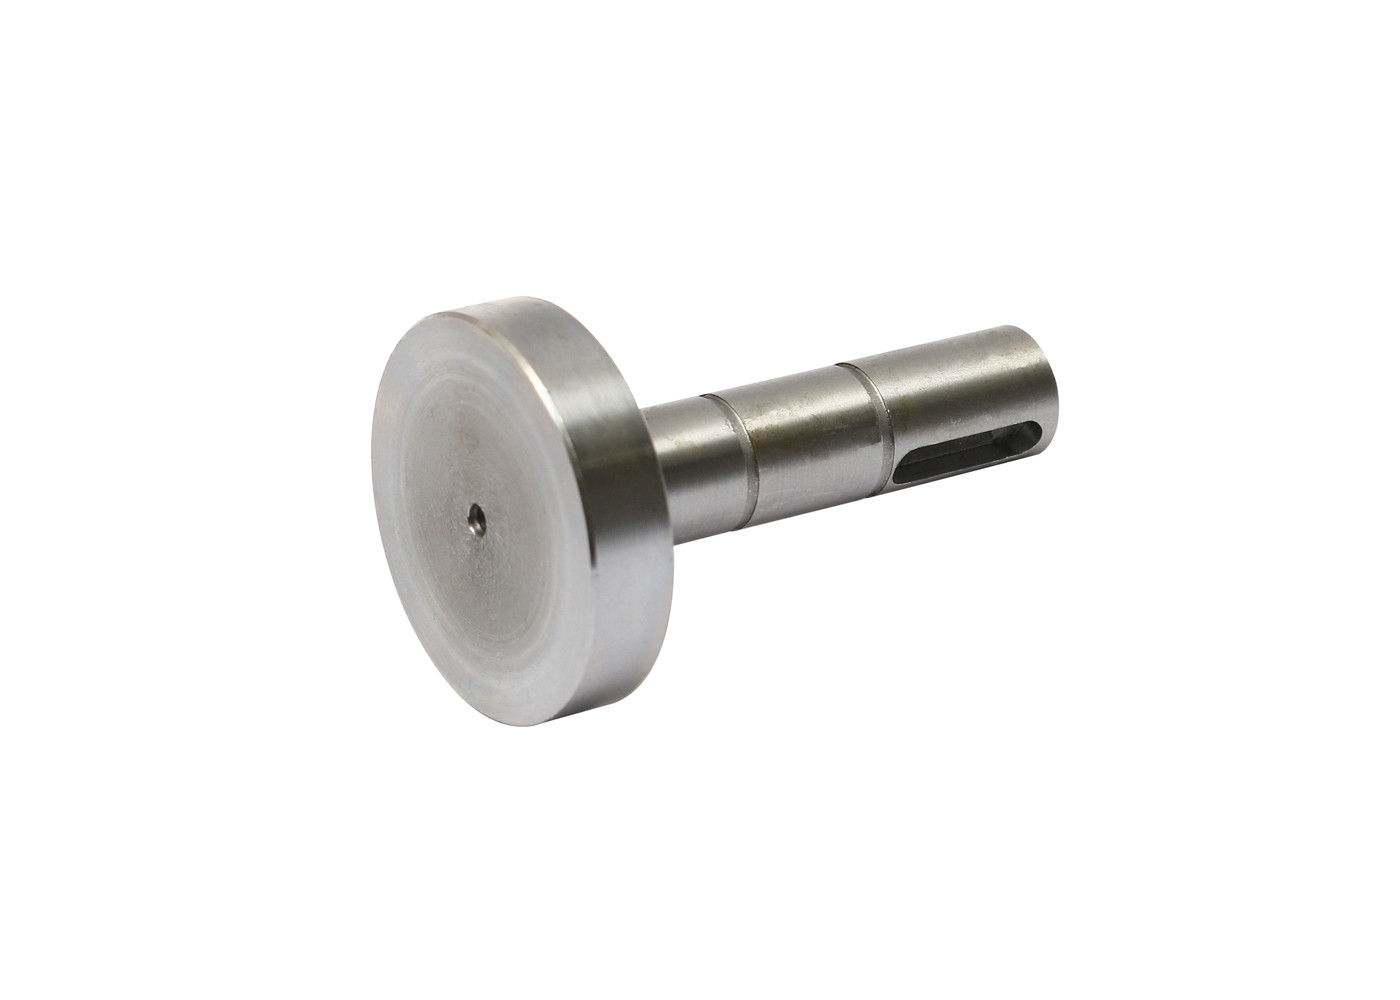 Buy cheap Spindle Motor Chrome Platin Machining Shaft Core Parts OEM product